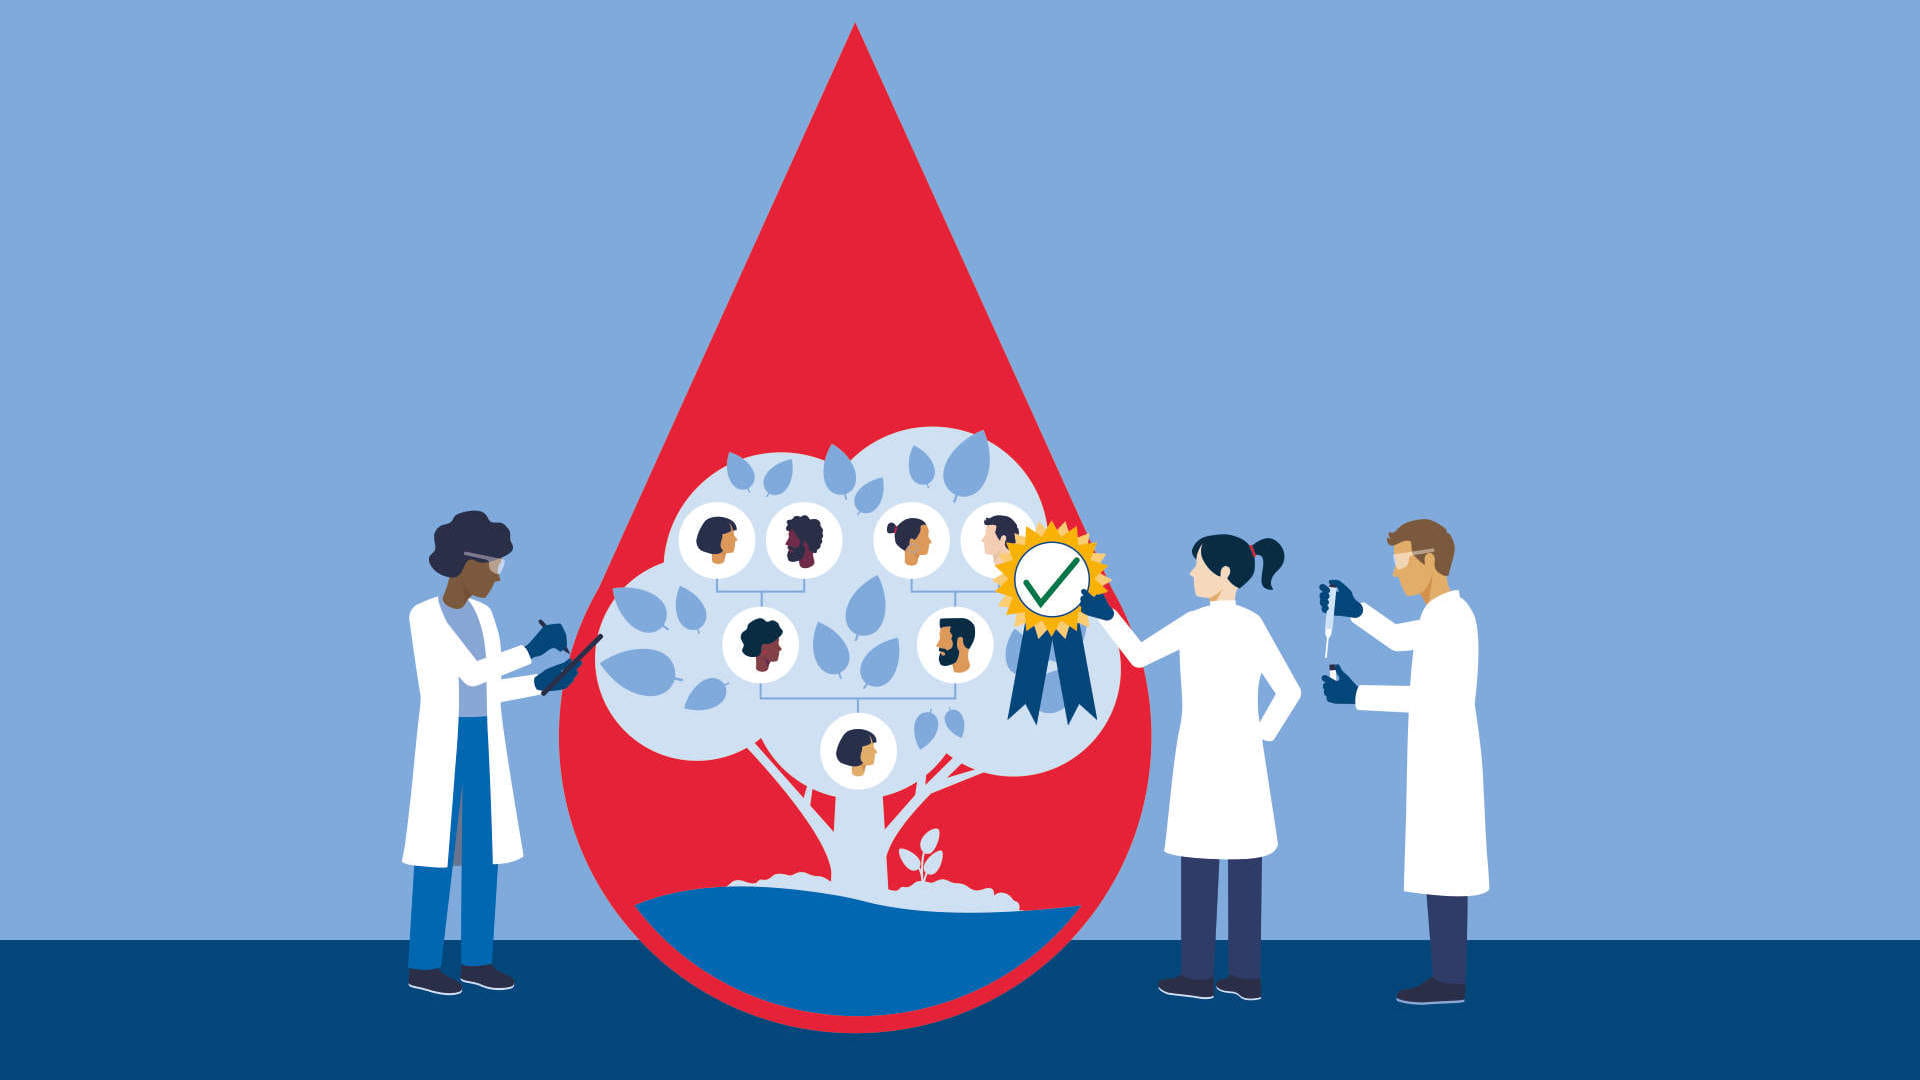 Scientists standing around a family tree in blood drop